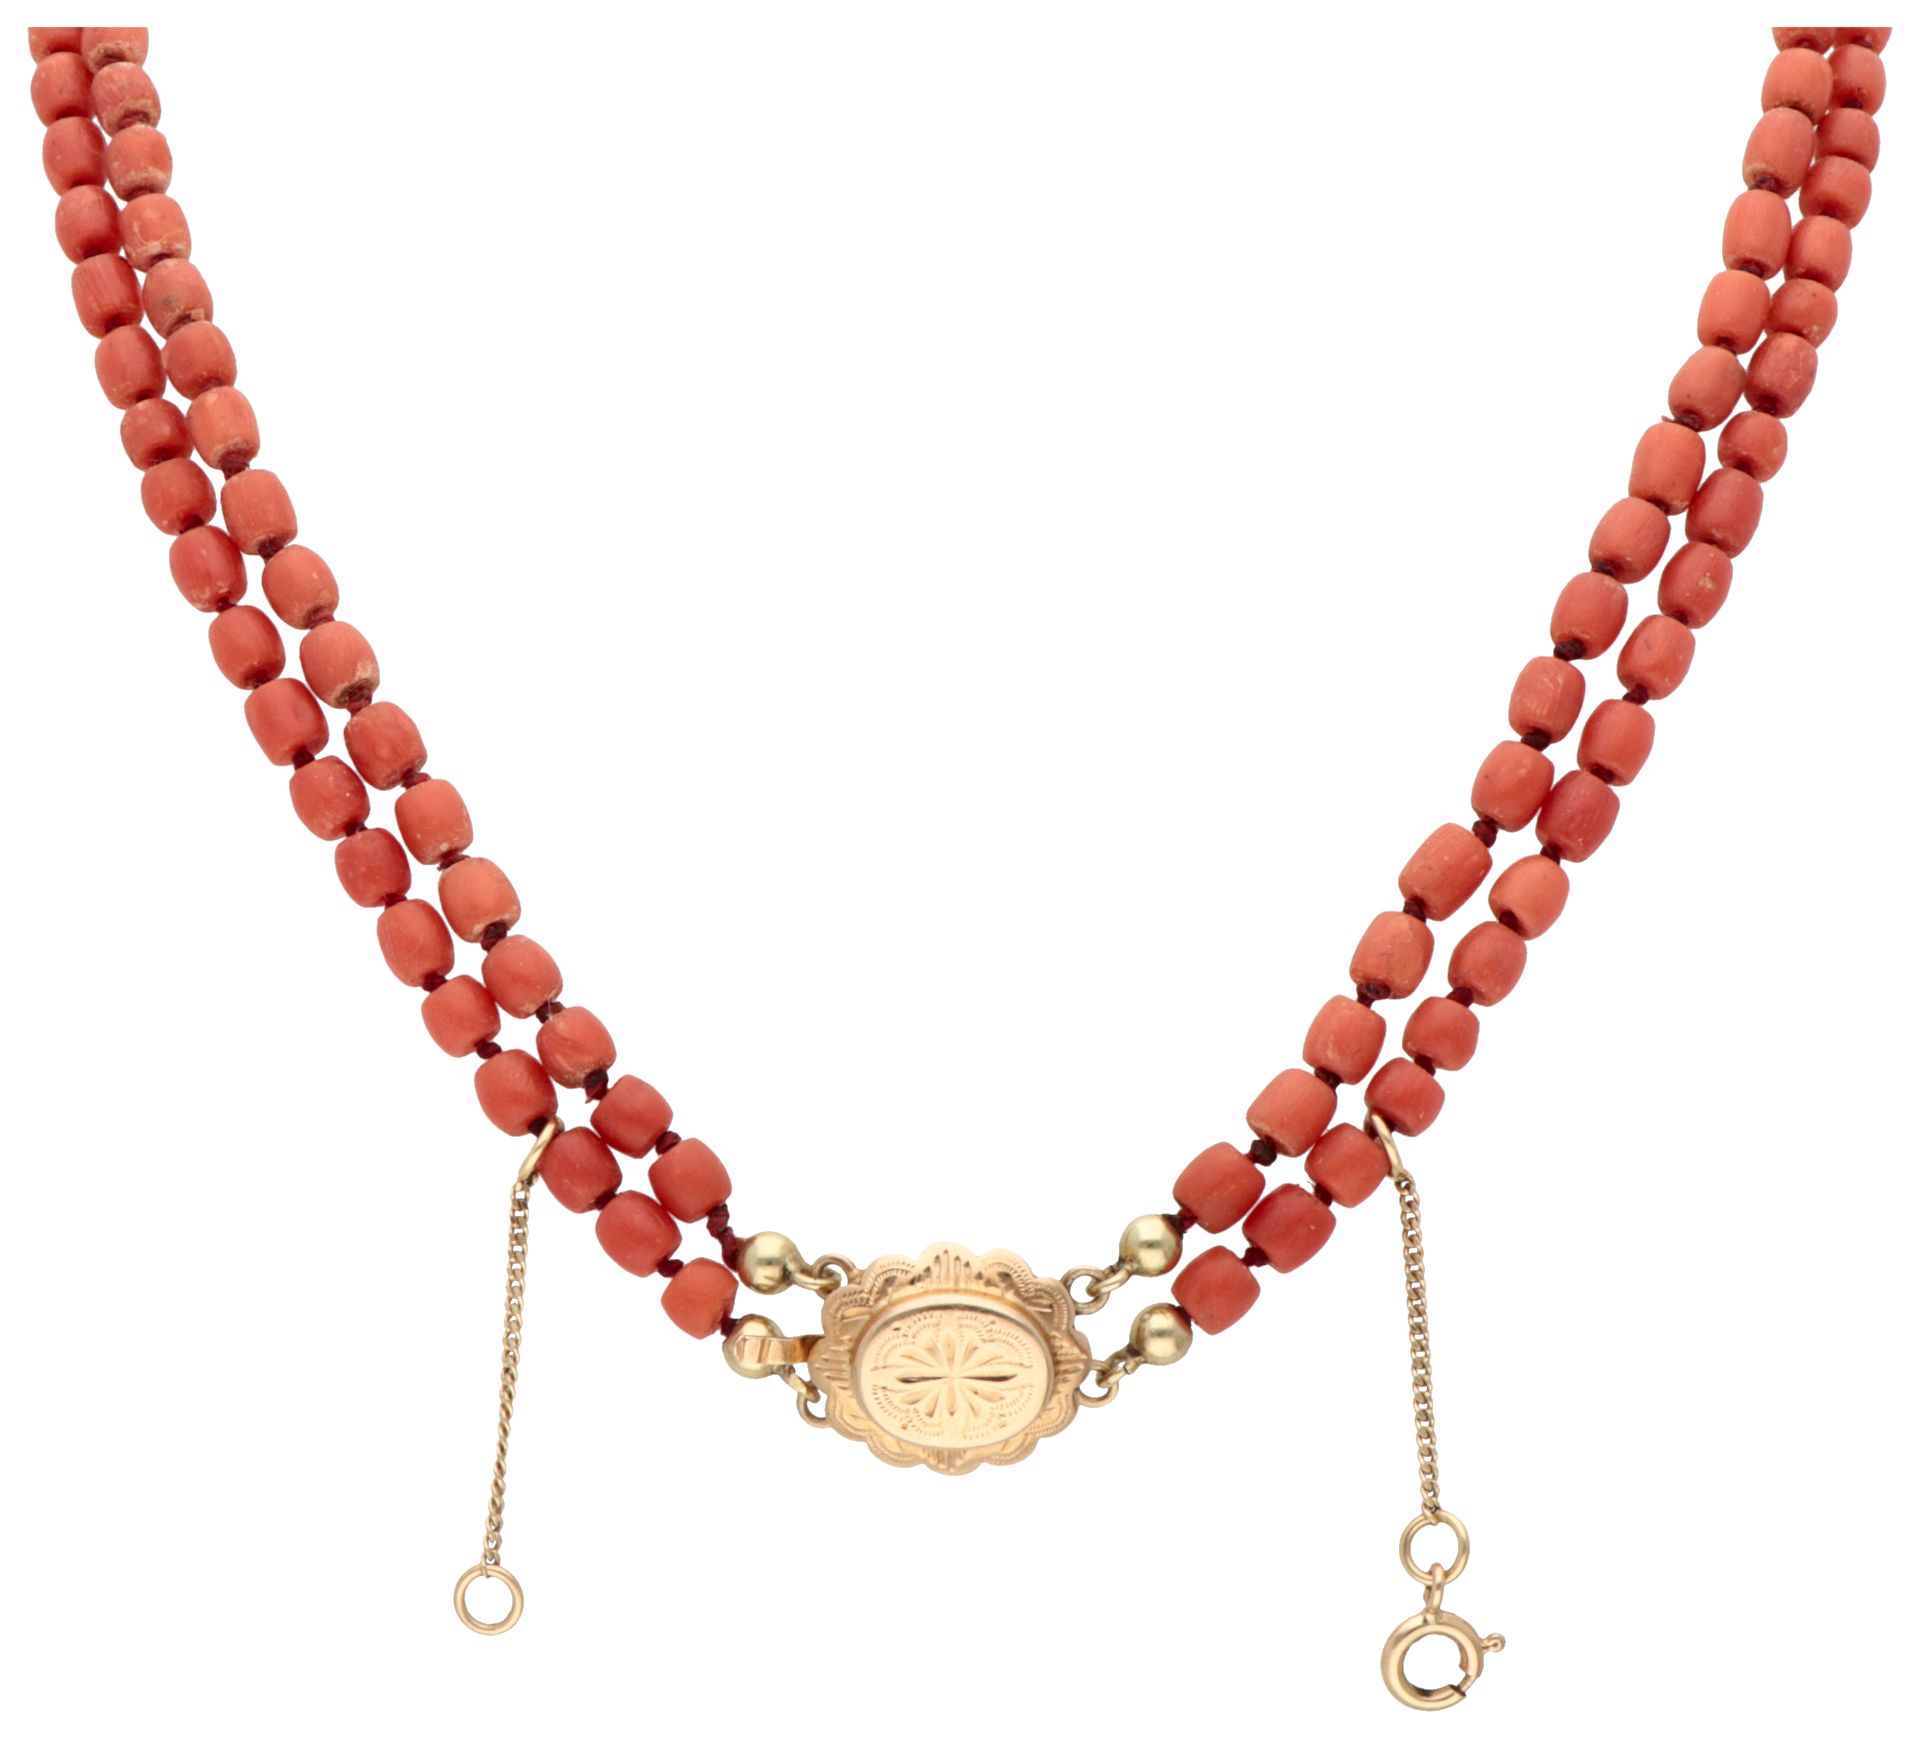 14K Yellow gold two-row red coral necklace.